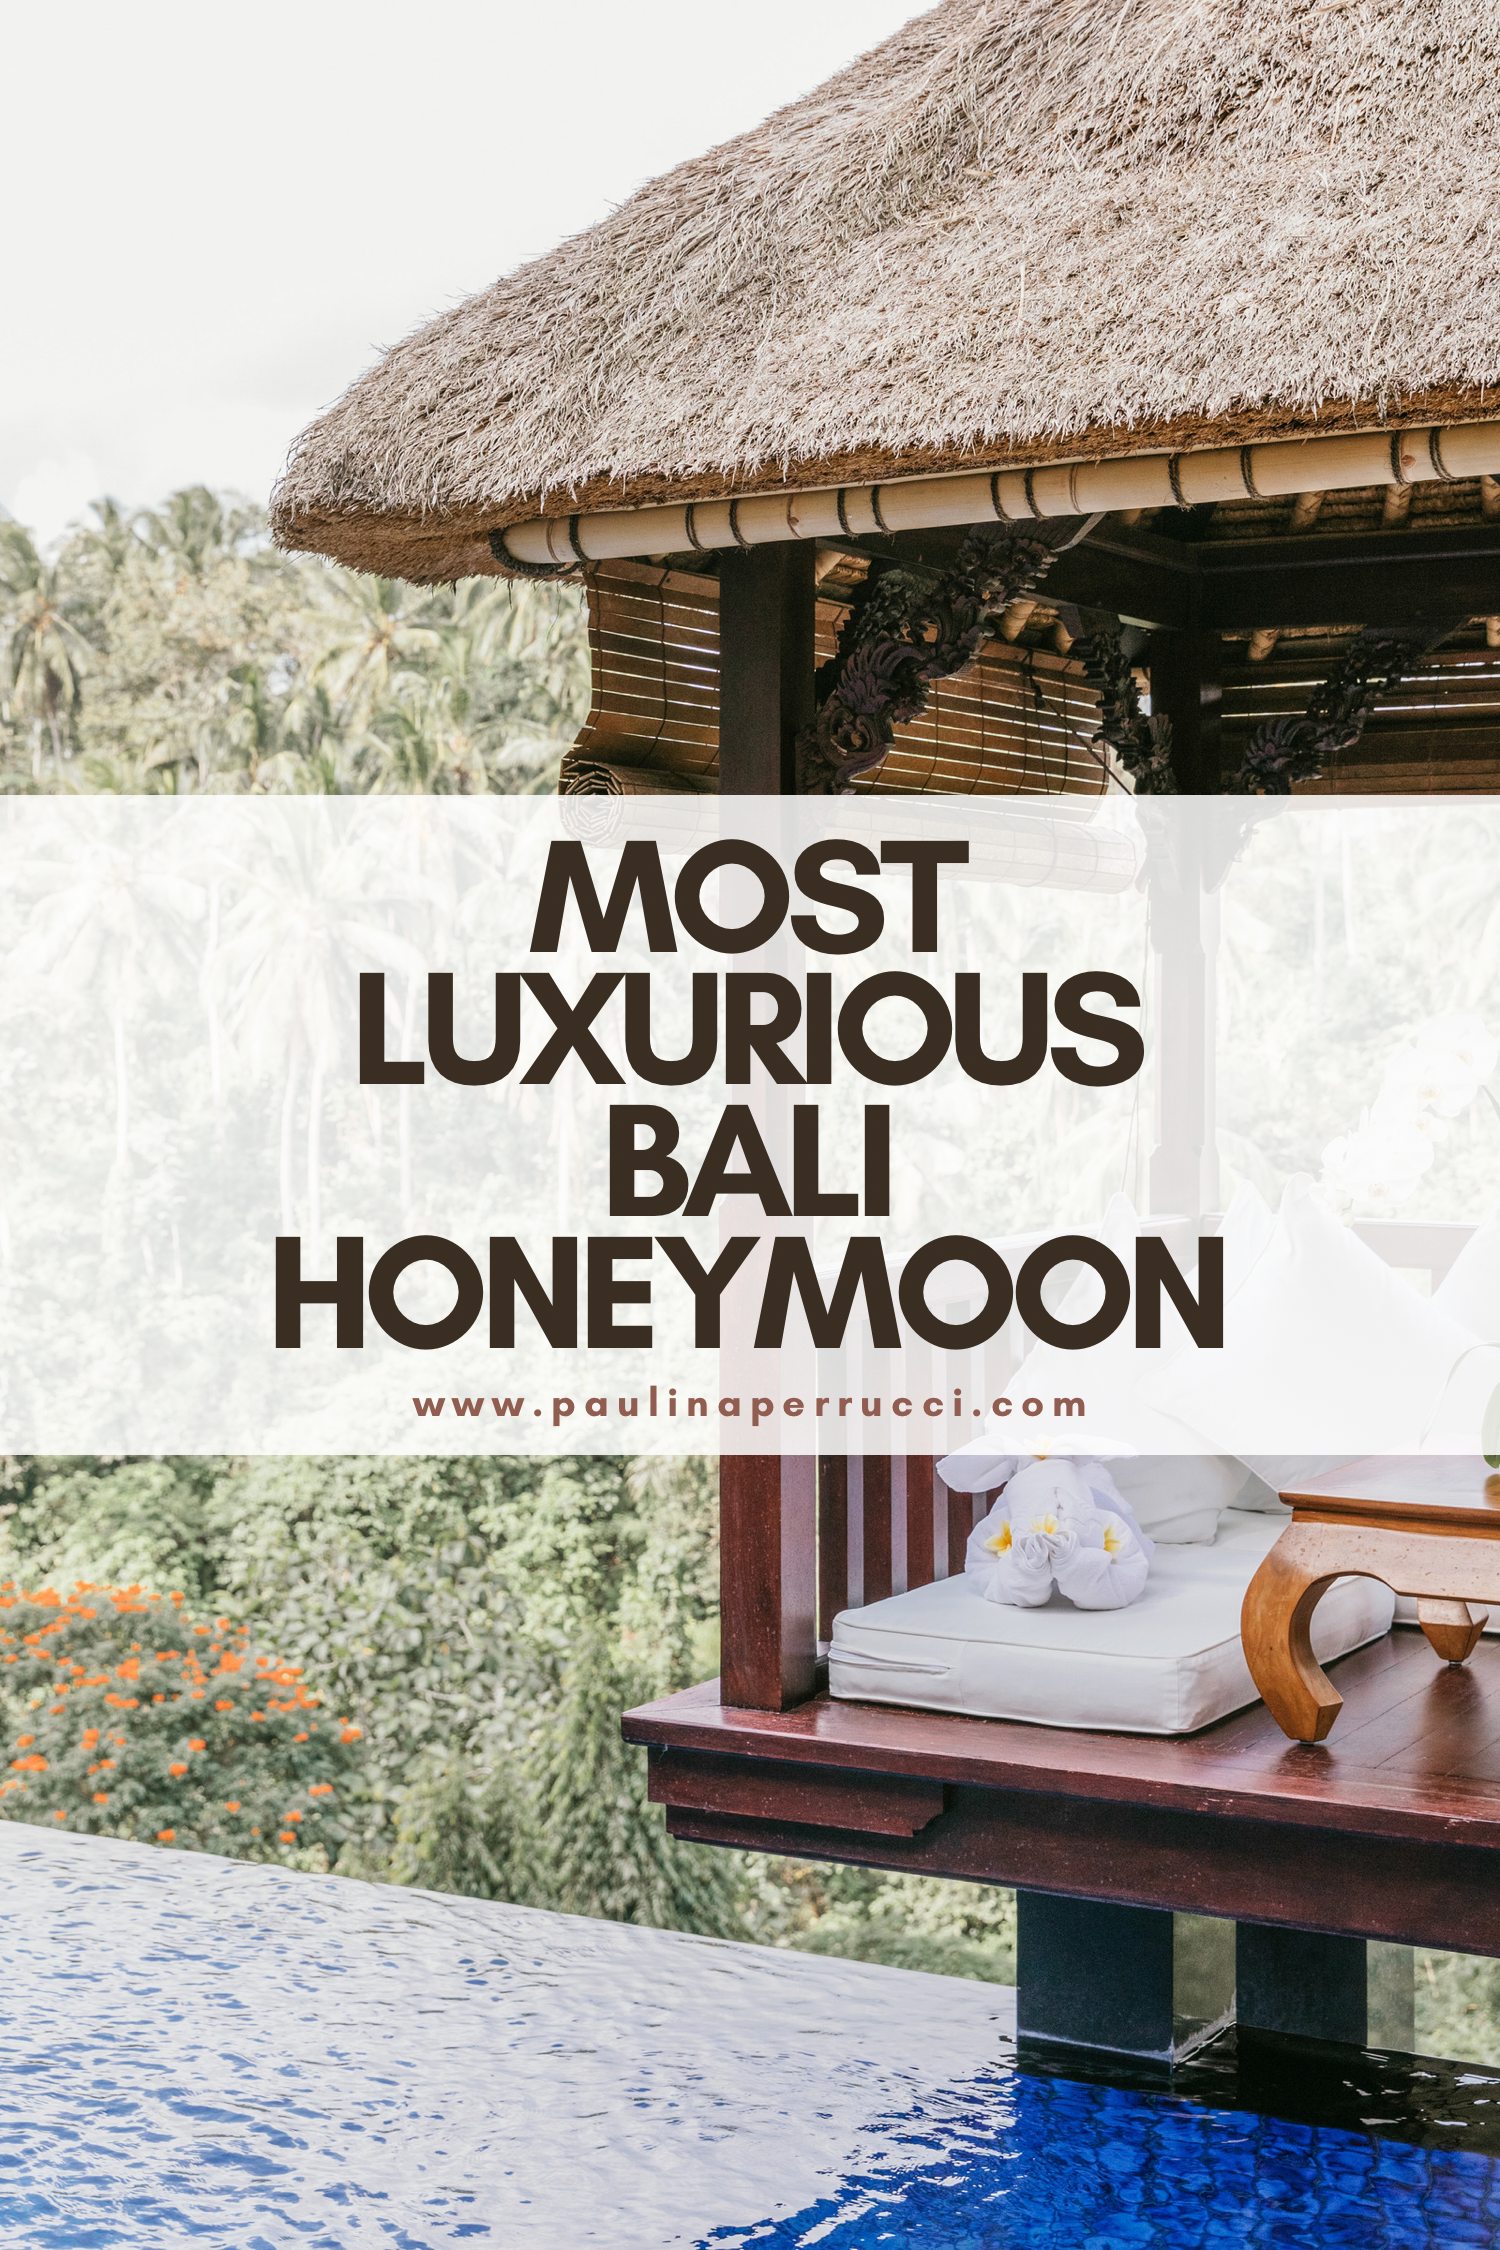 Luxury 5 Star Experience in the Jungle of Ubud, Bali at the Viceroy